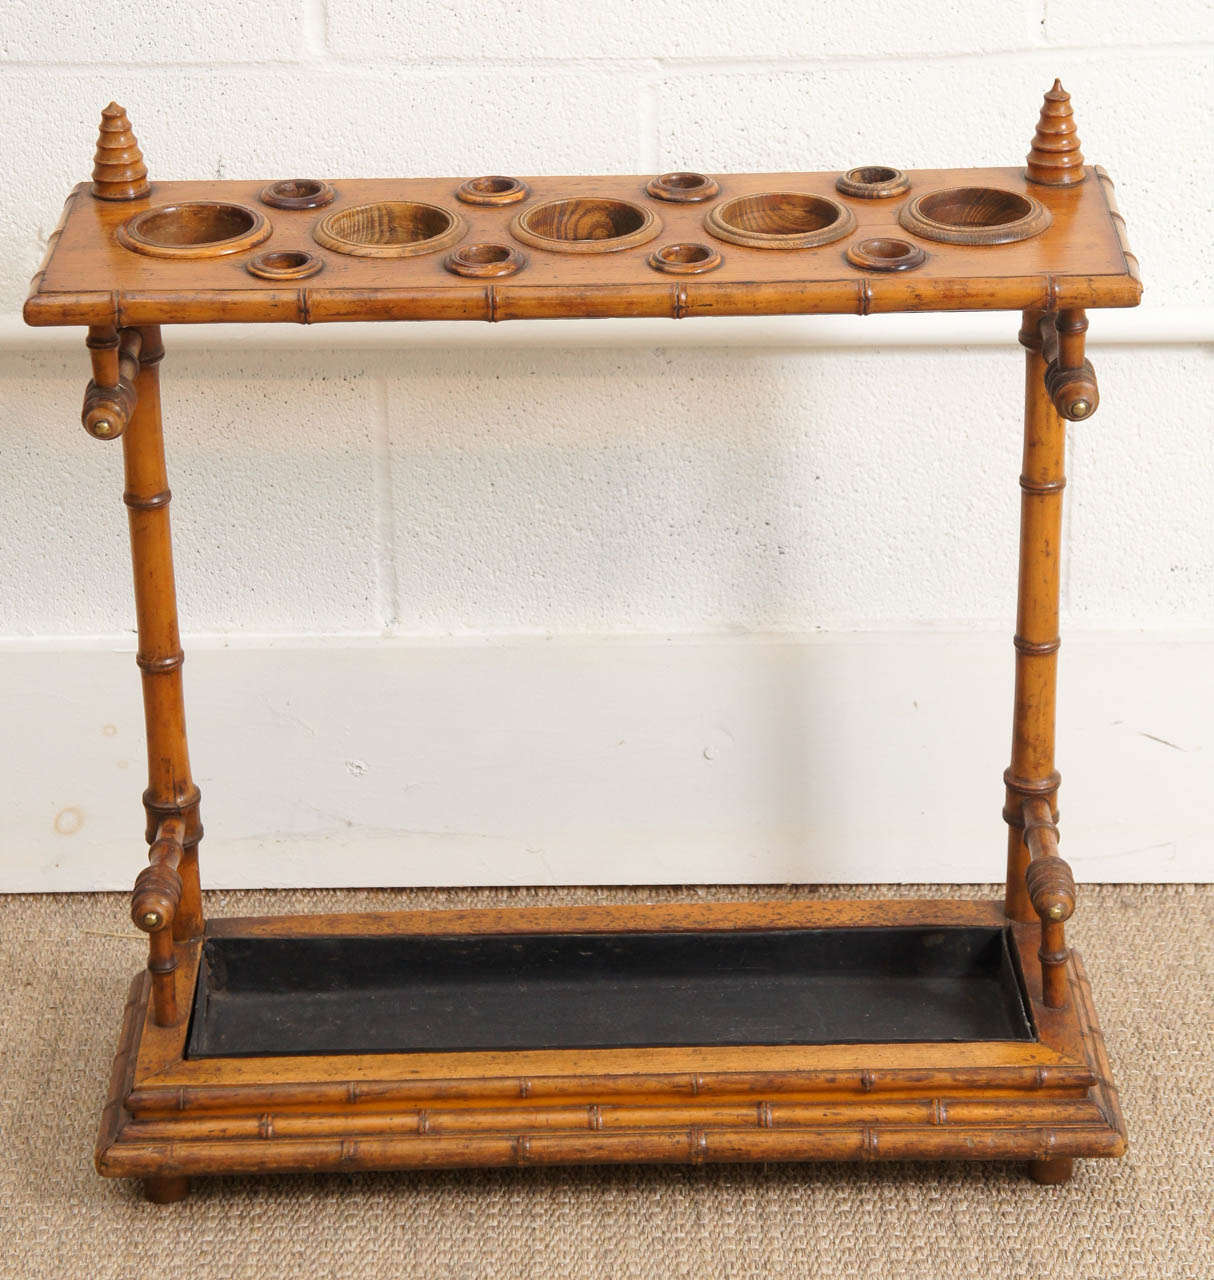 Here is an English Victorian cane and umbrella stand in a bamboo motif with a black lacquered zinc liner.